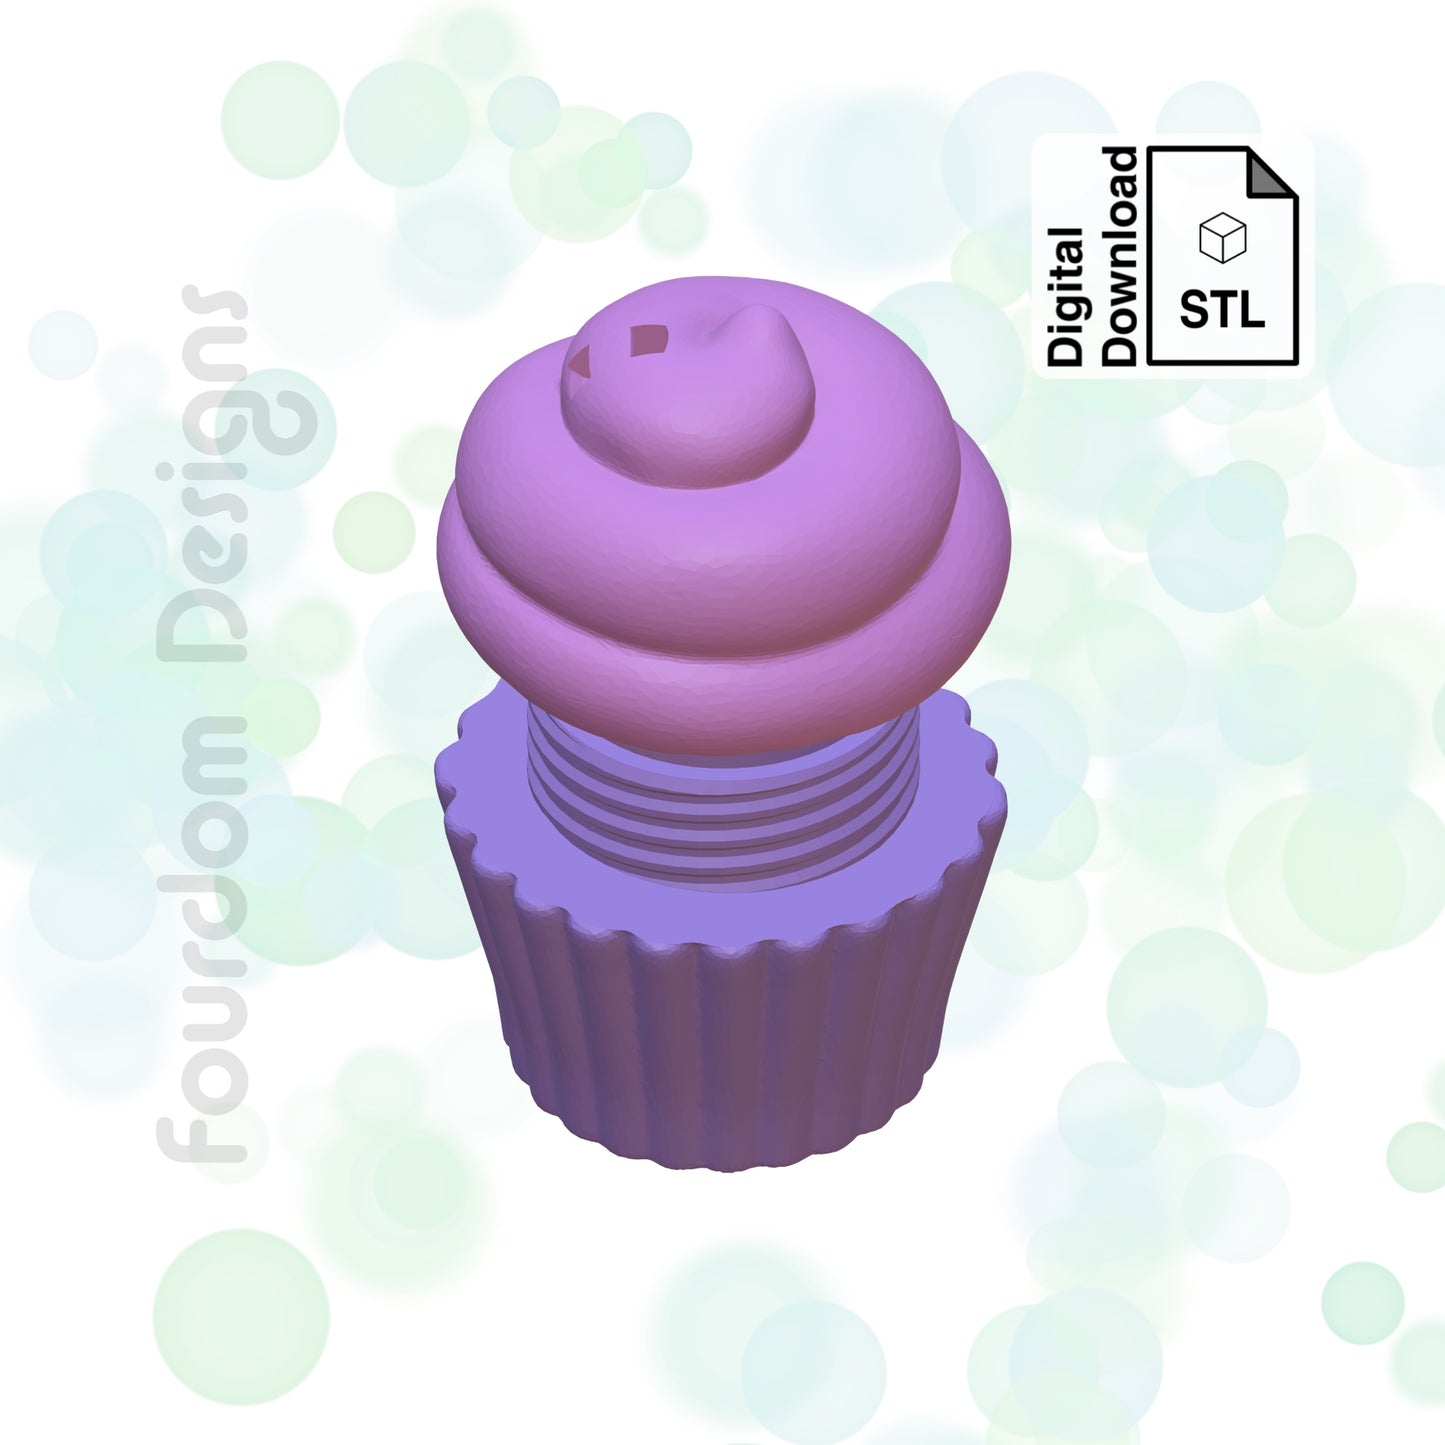 Cupcake Keychain with Removable Screw Top Pill Box Hex STL File for 3D Printing - Digital Download